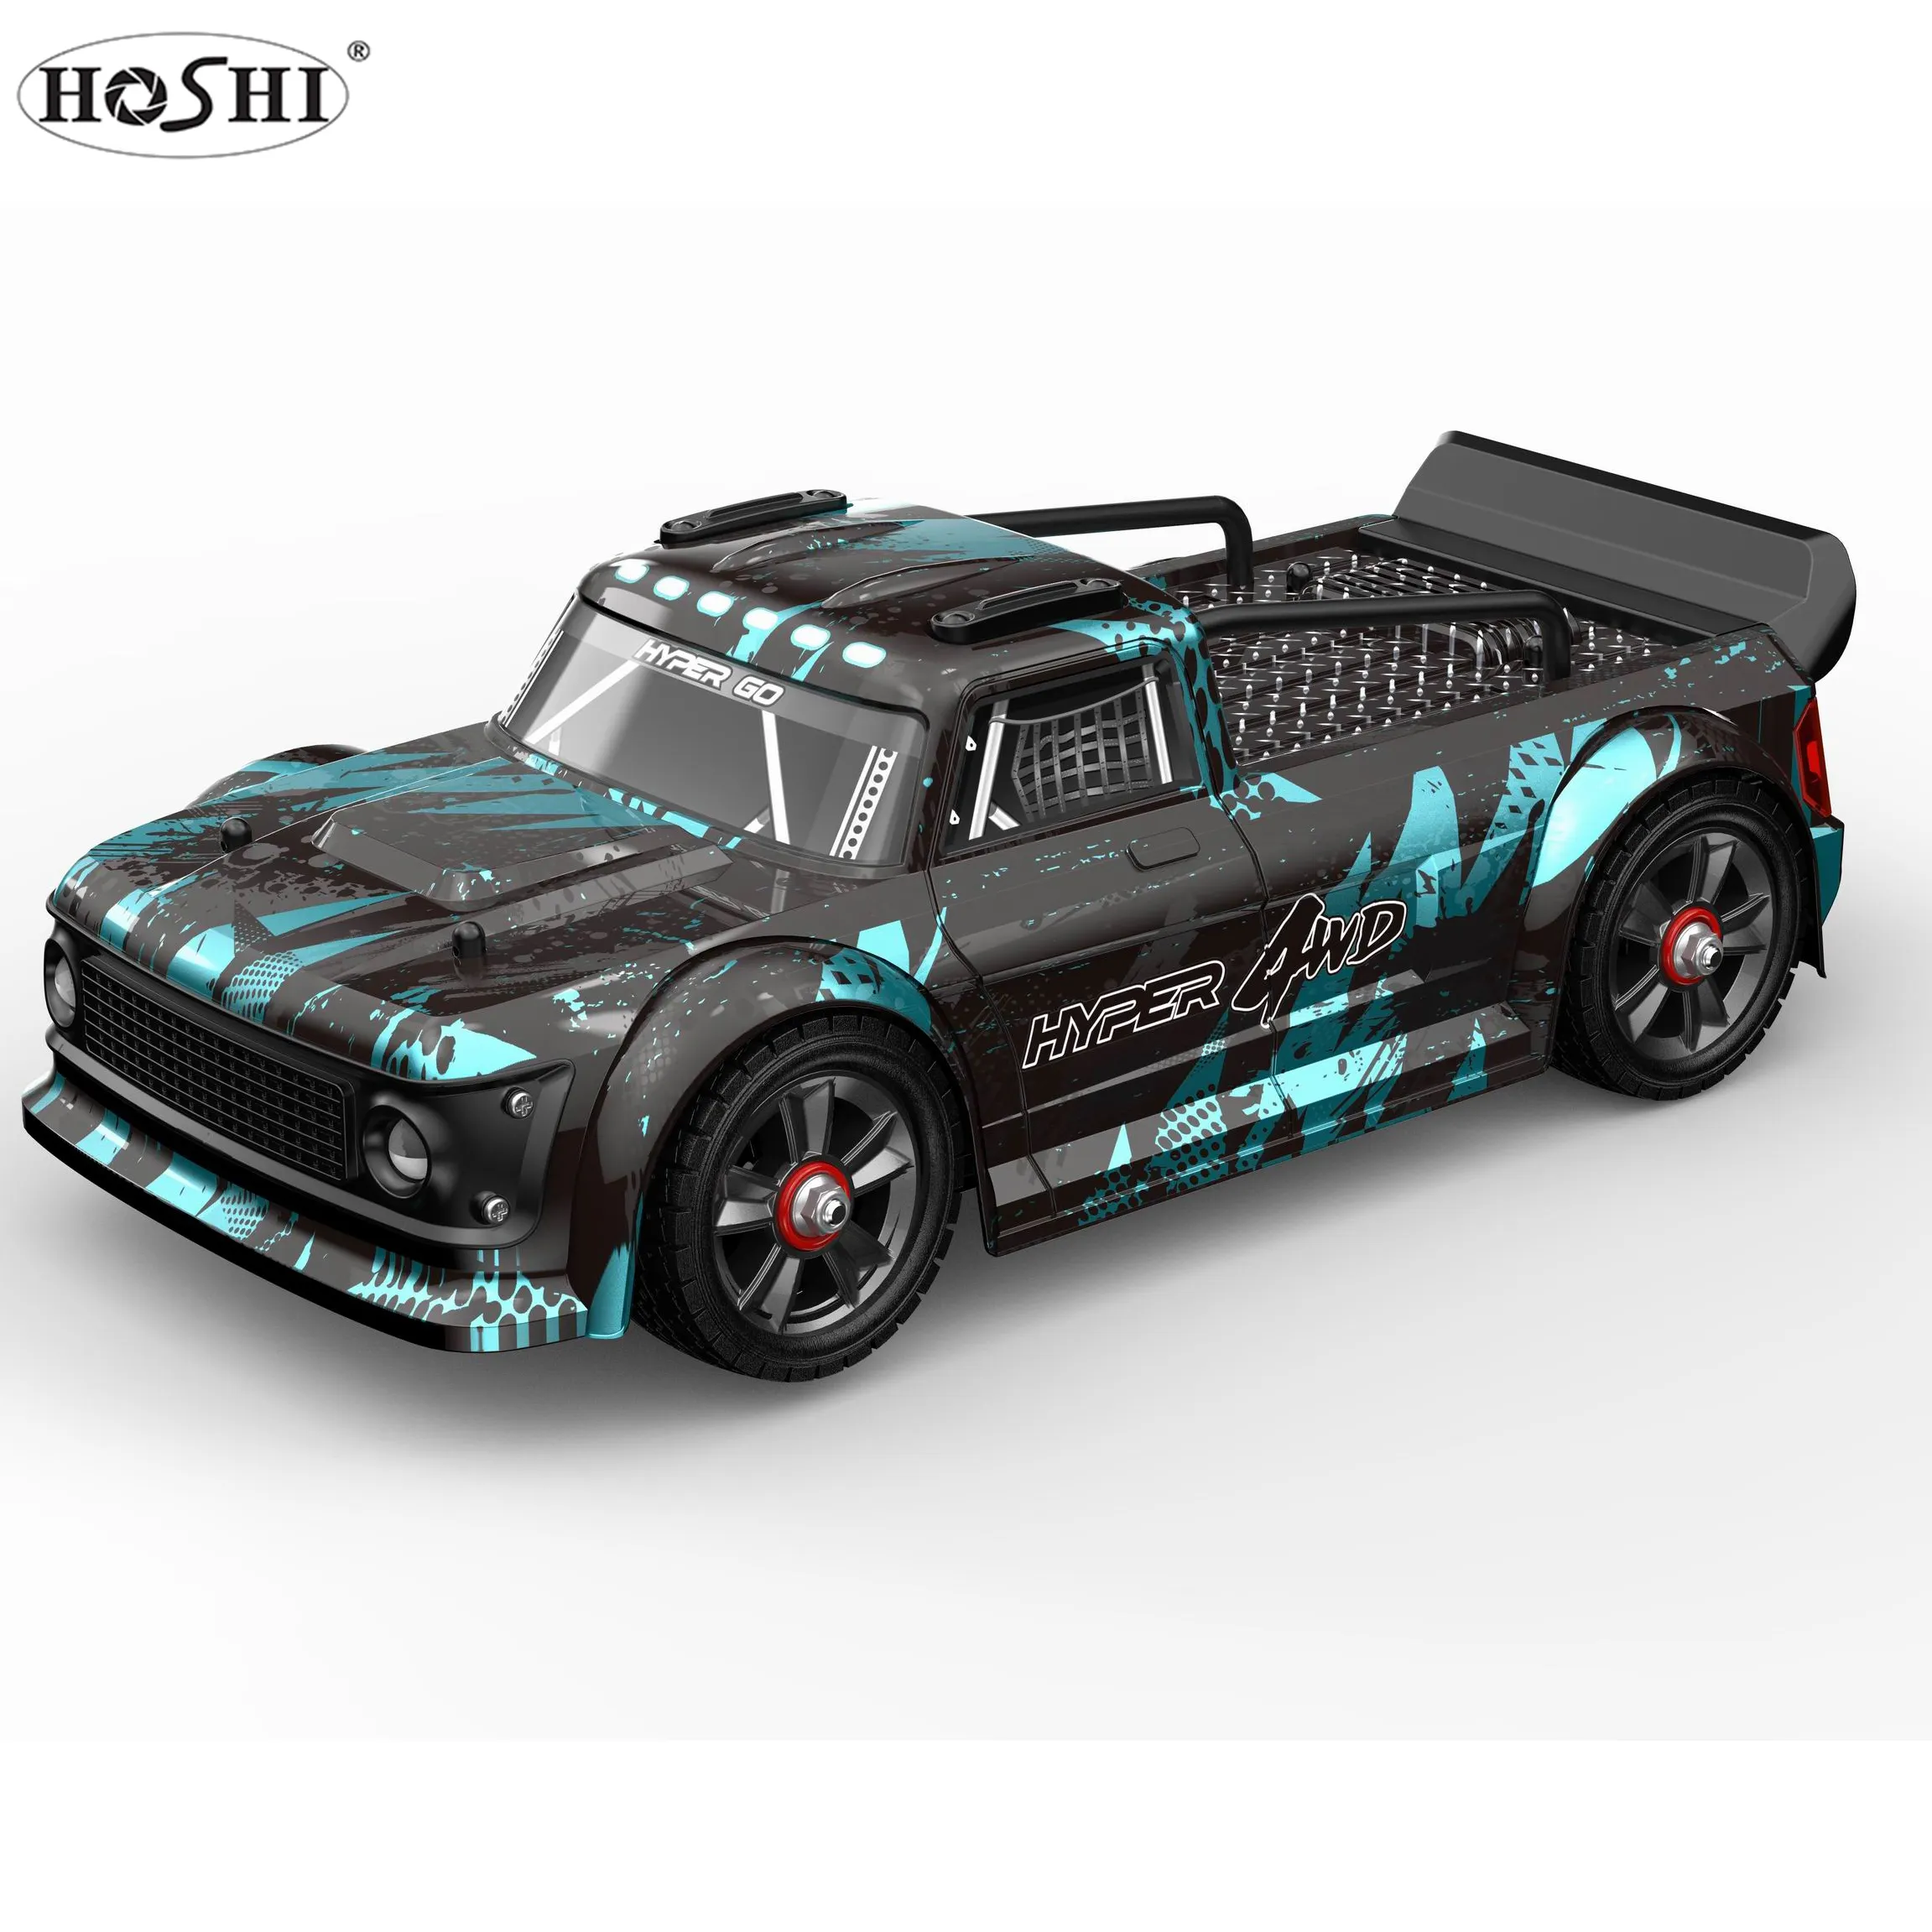 HOSHI MJX Hyper Go 14301 RC Cars 1/14 Drift Racing Car All-metal Chassis Remote Control Brushless Cars 55KM/H Truck